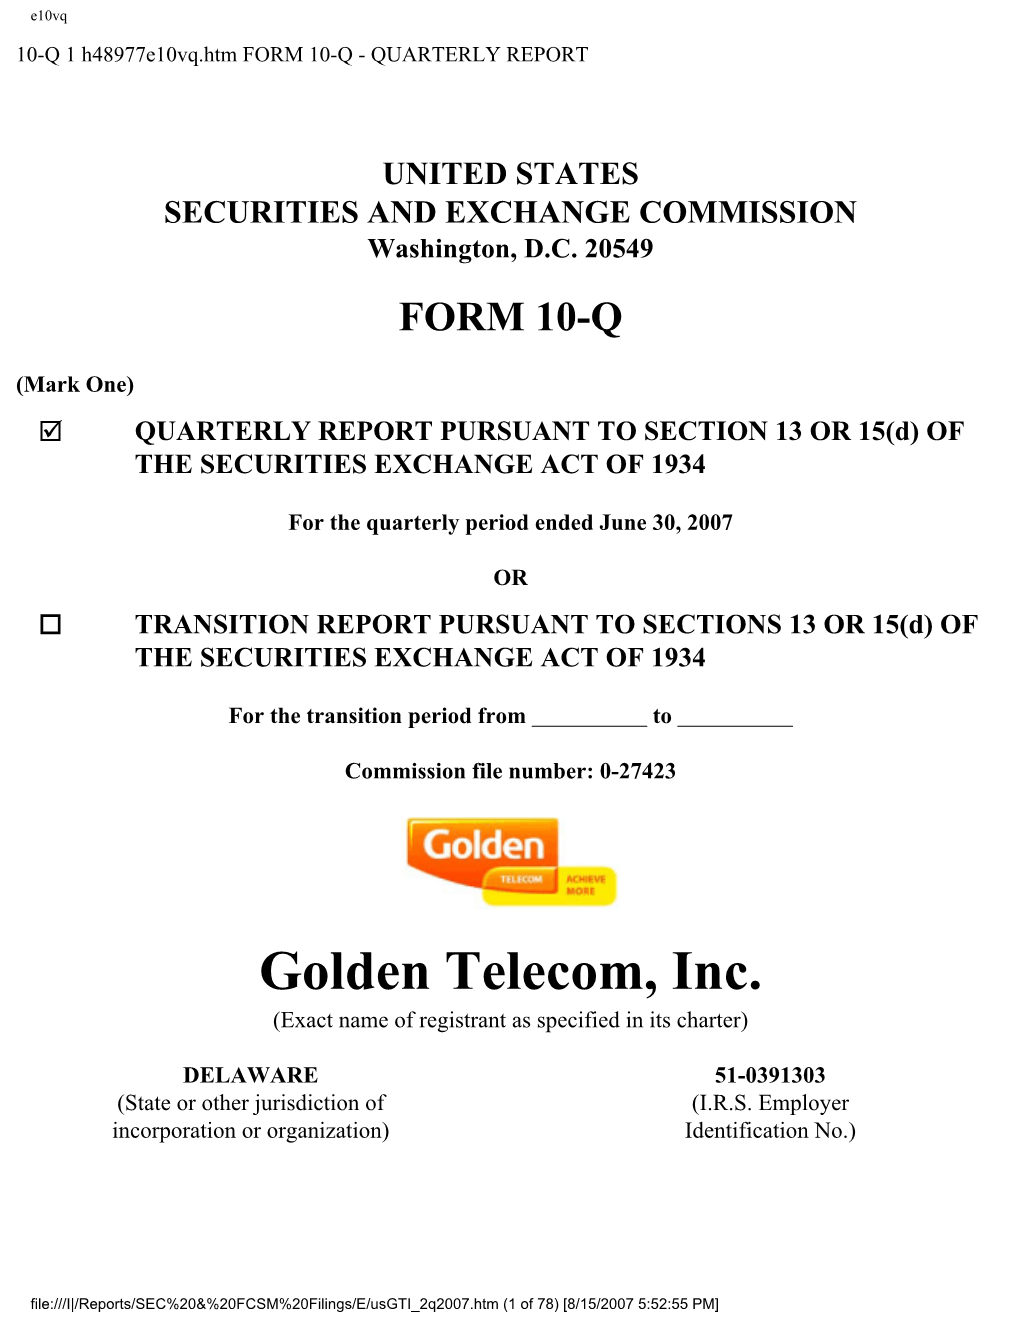 Golden Telecom, Inc. (Exact Name of Registrant As Specified in Its Charter)